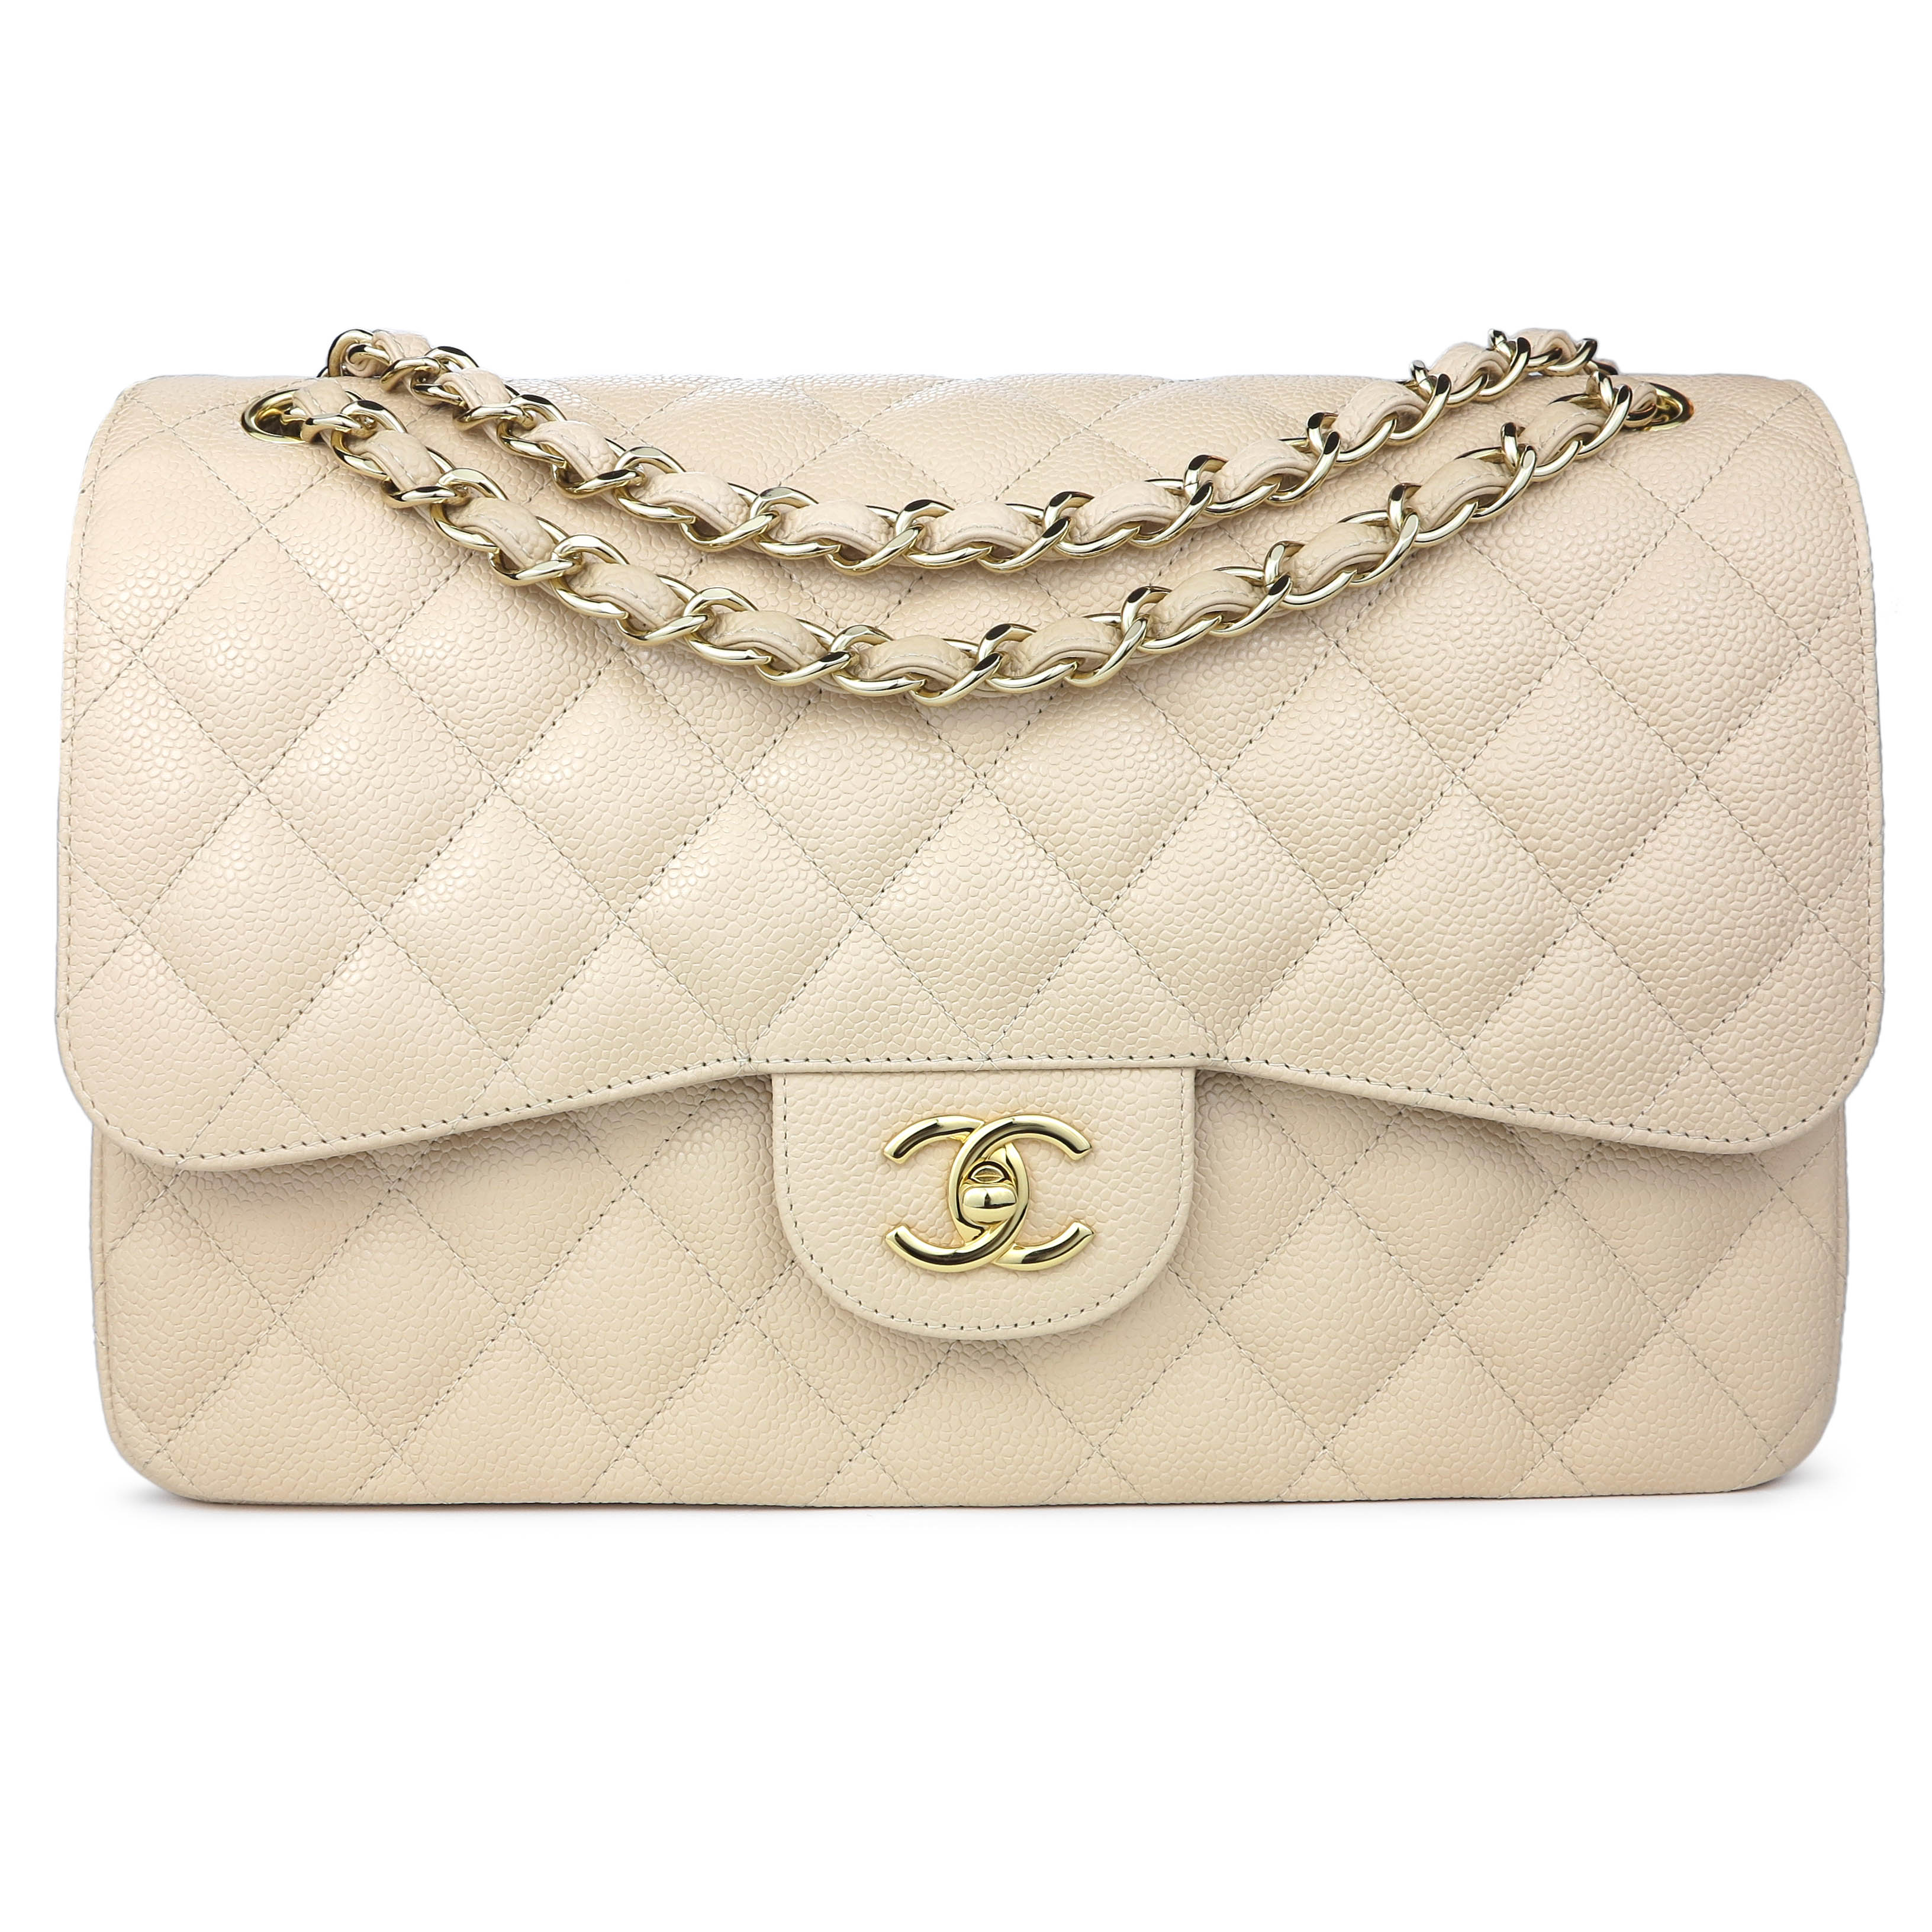 CHANEL Jumbo Classic Double Flap Bag in Beige Clair Caviar GHW